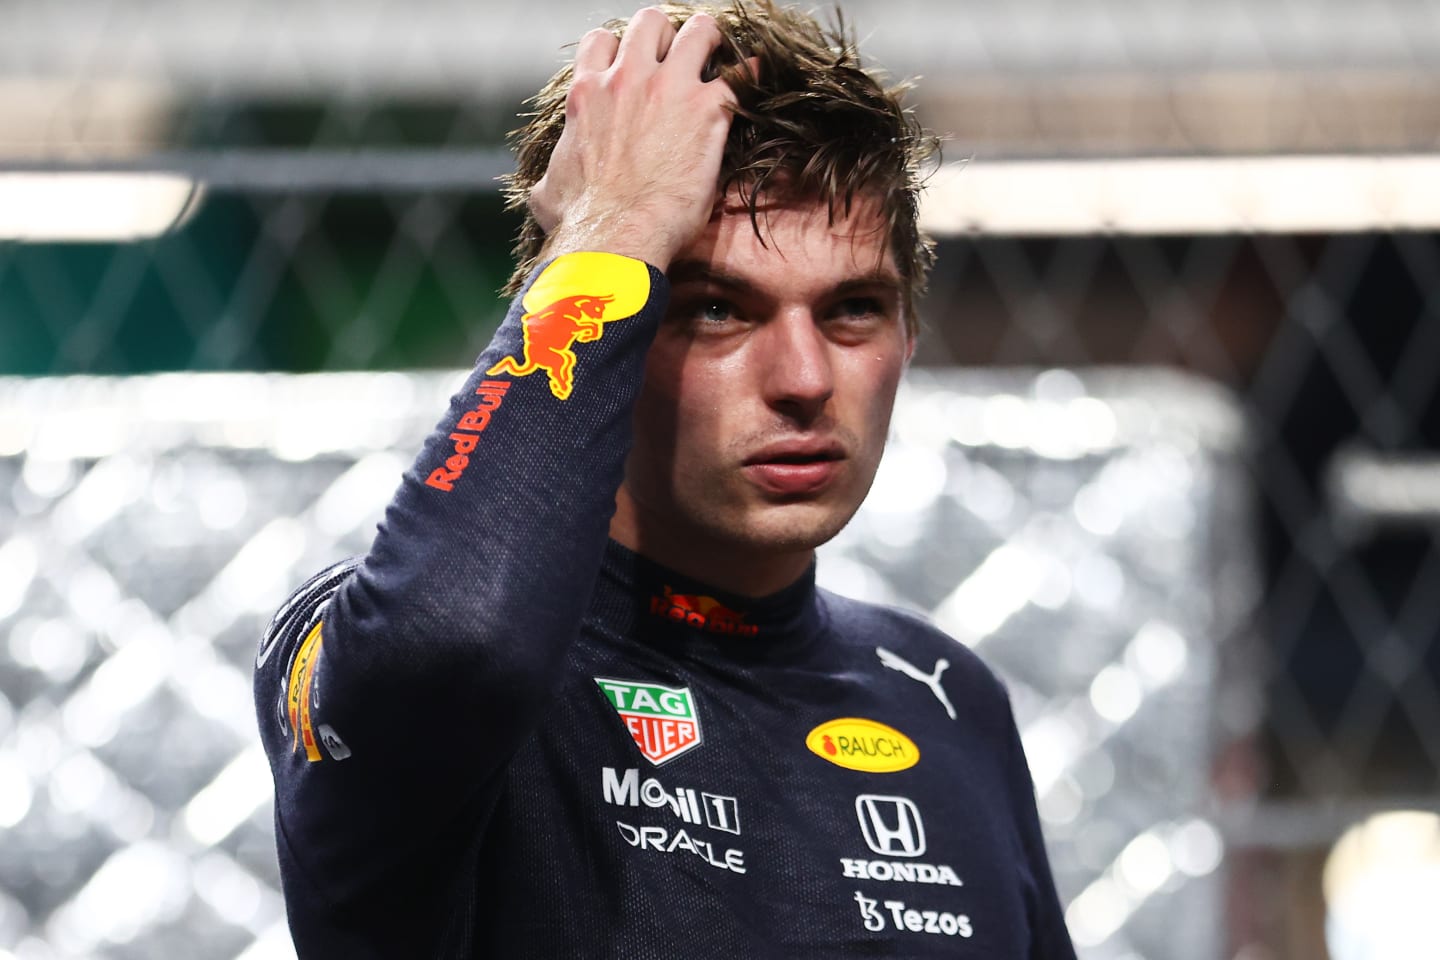 JEDDAH, SAUDI ARABIA - DECEMBER 04: Third place qualifier Max Verstappen of Netherlands and Red Bull Racing looks on in parc ferme during qualifying ahead of the F1 Grand Prix of Saudi Arabia at Jeddah Corniche Circuit on December 04, 2021 in Jeddah, Saudi Arabia. (Photo by Bryn Lennon - Formula 1/Formula 1 via Getty Images)